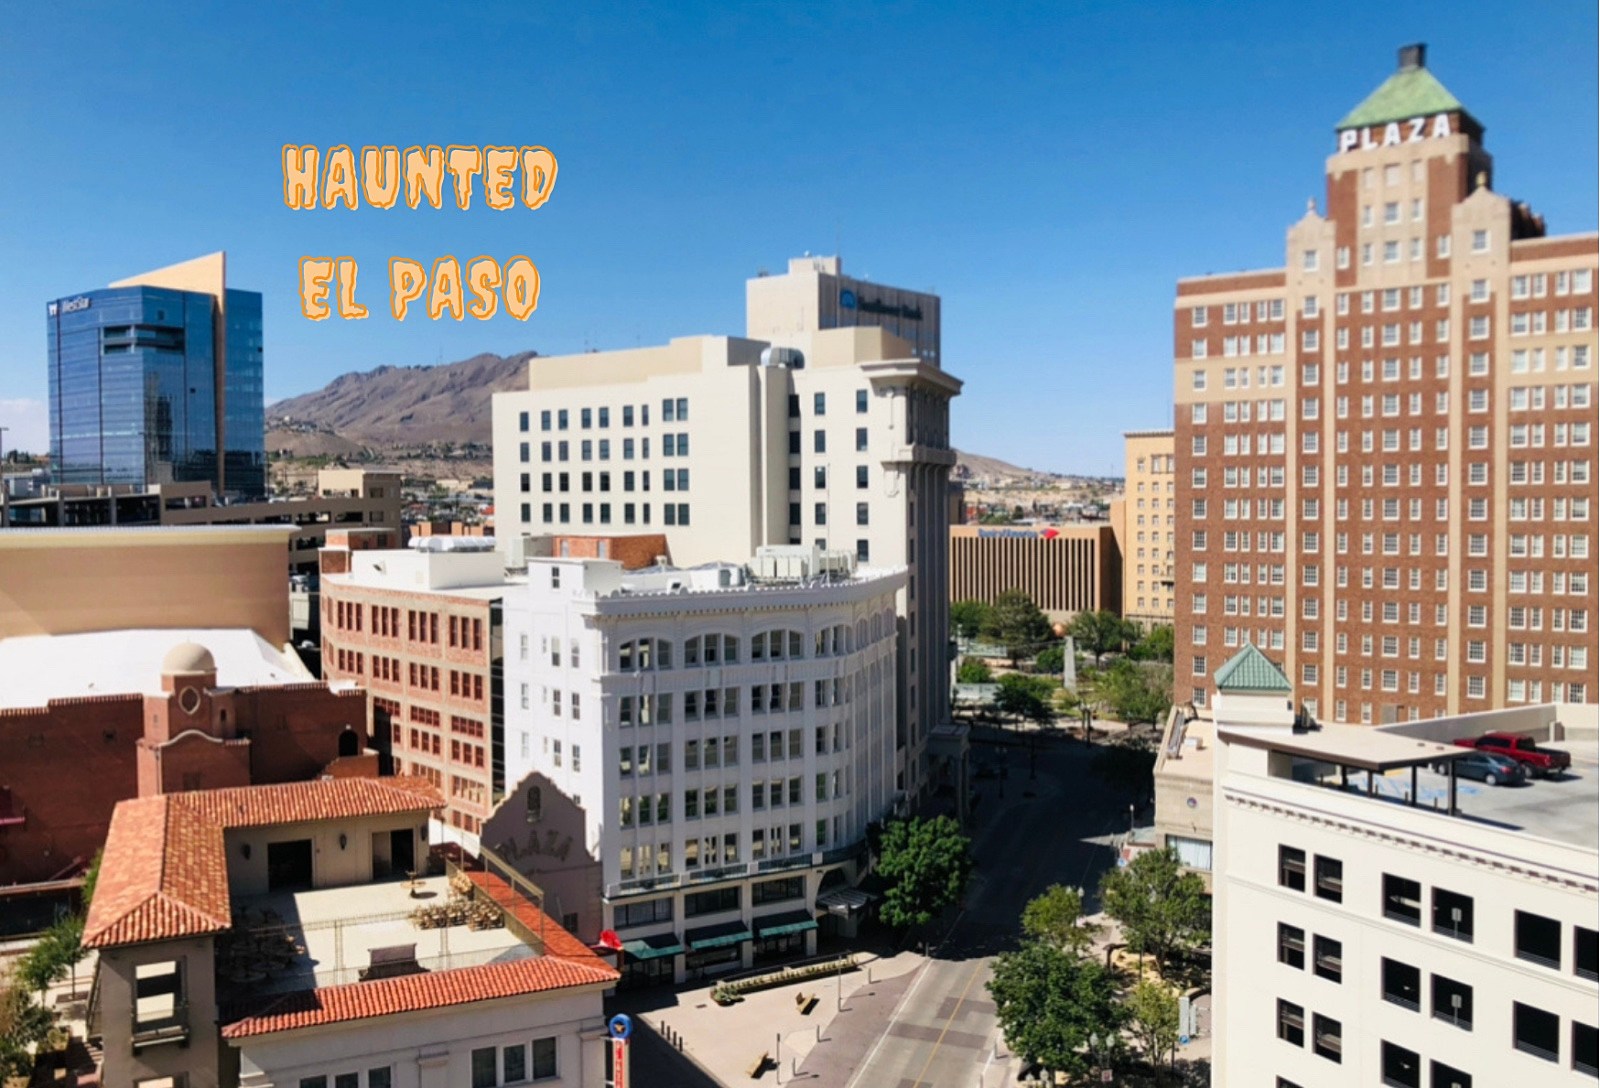 Haunted El Paso Revisited The House on Silver Street/Google Ghost [PHOTOS]